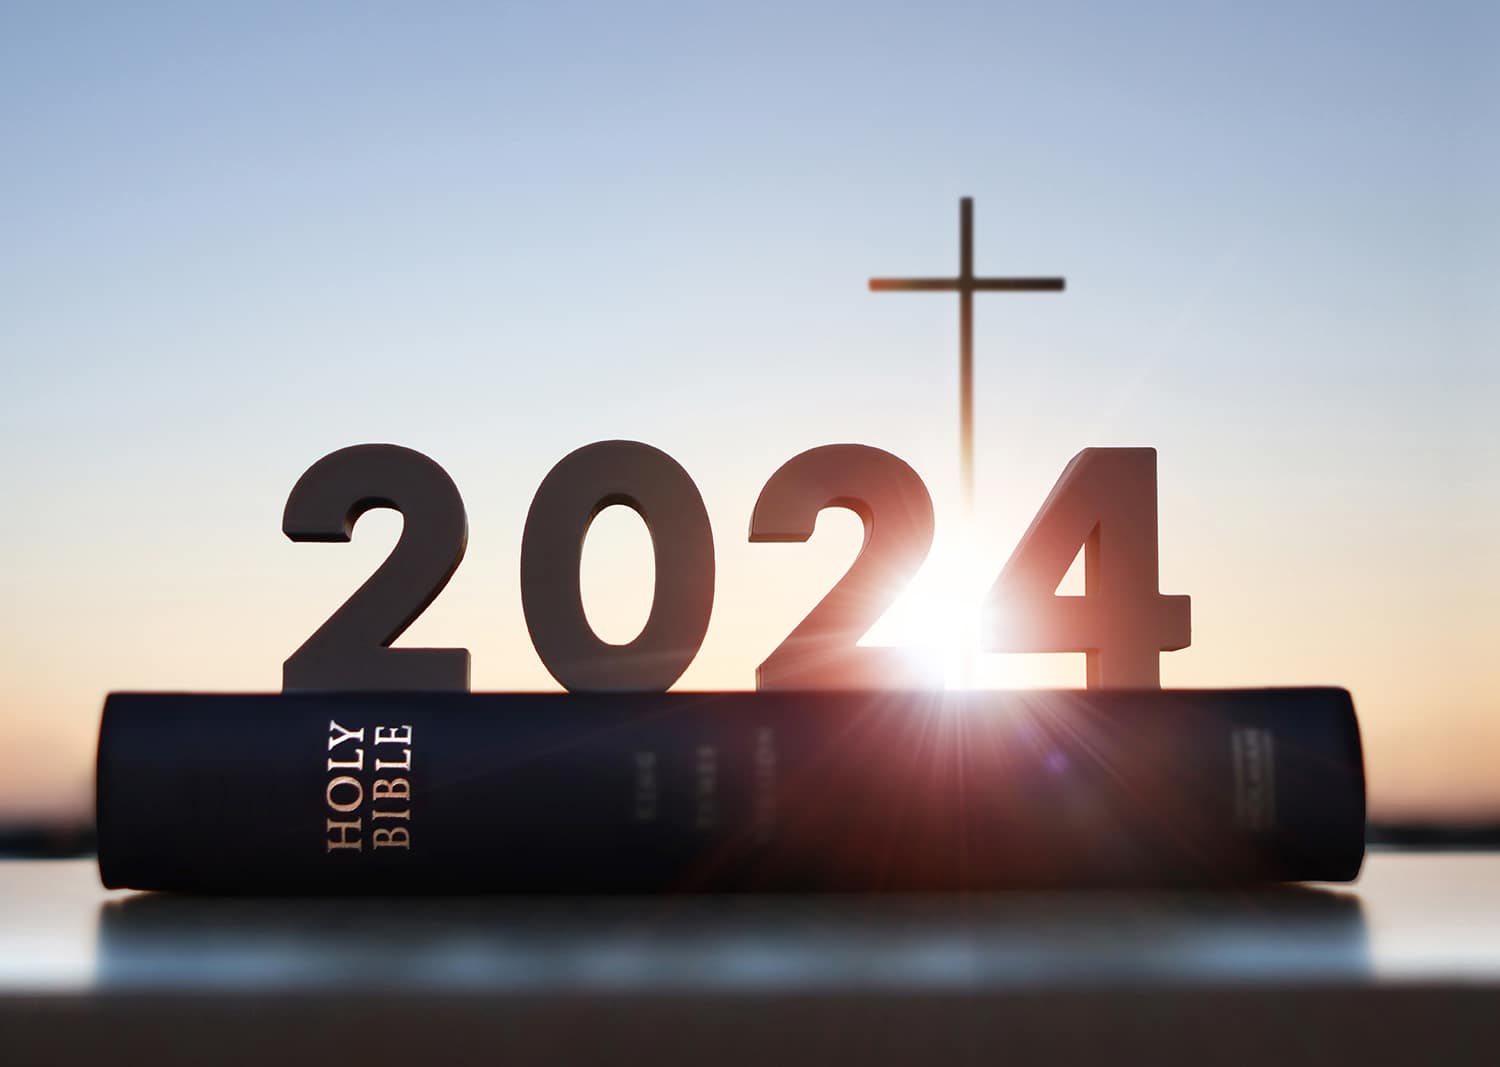 Catholic leaders New Year's resolutions